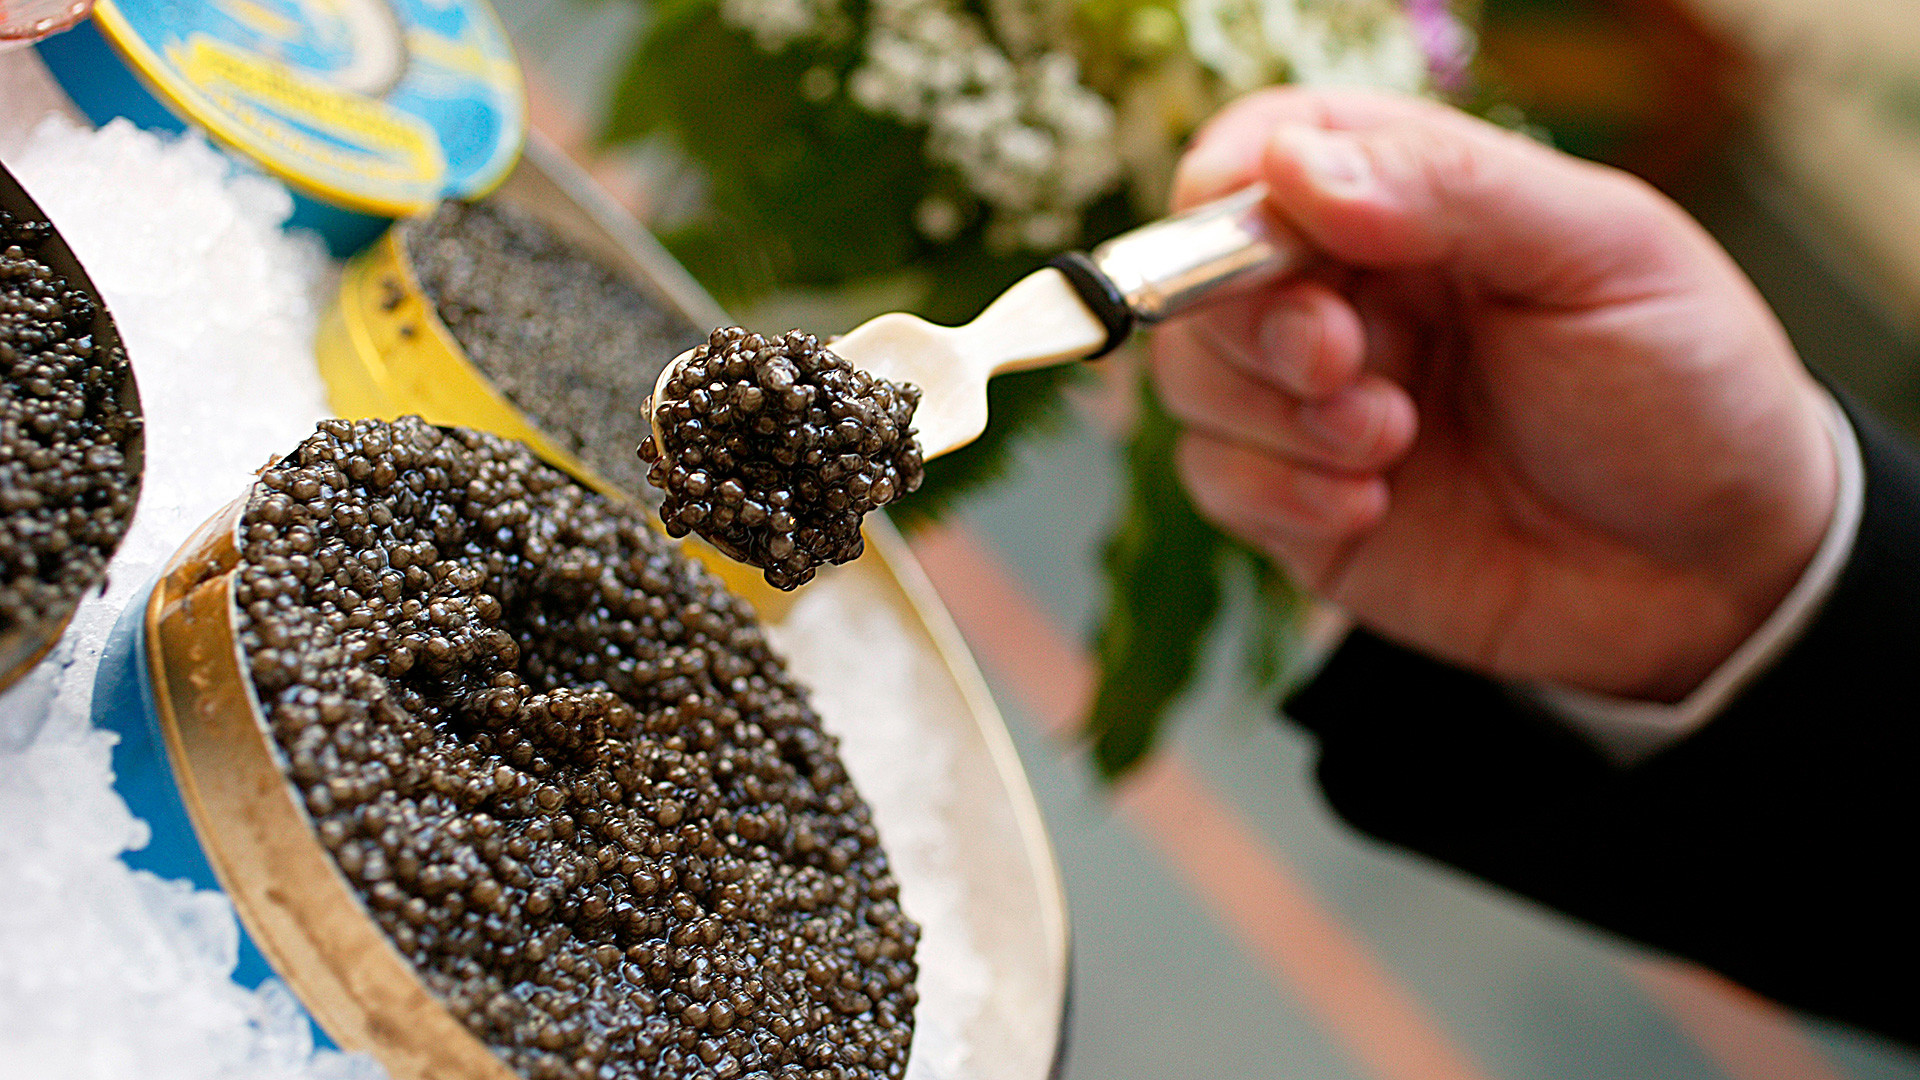 In Moscow especially, the demand for caviar is high. Smugglers risk it all to bring their goods to the Russian capital where they can get a good deal.